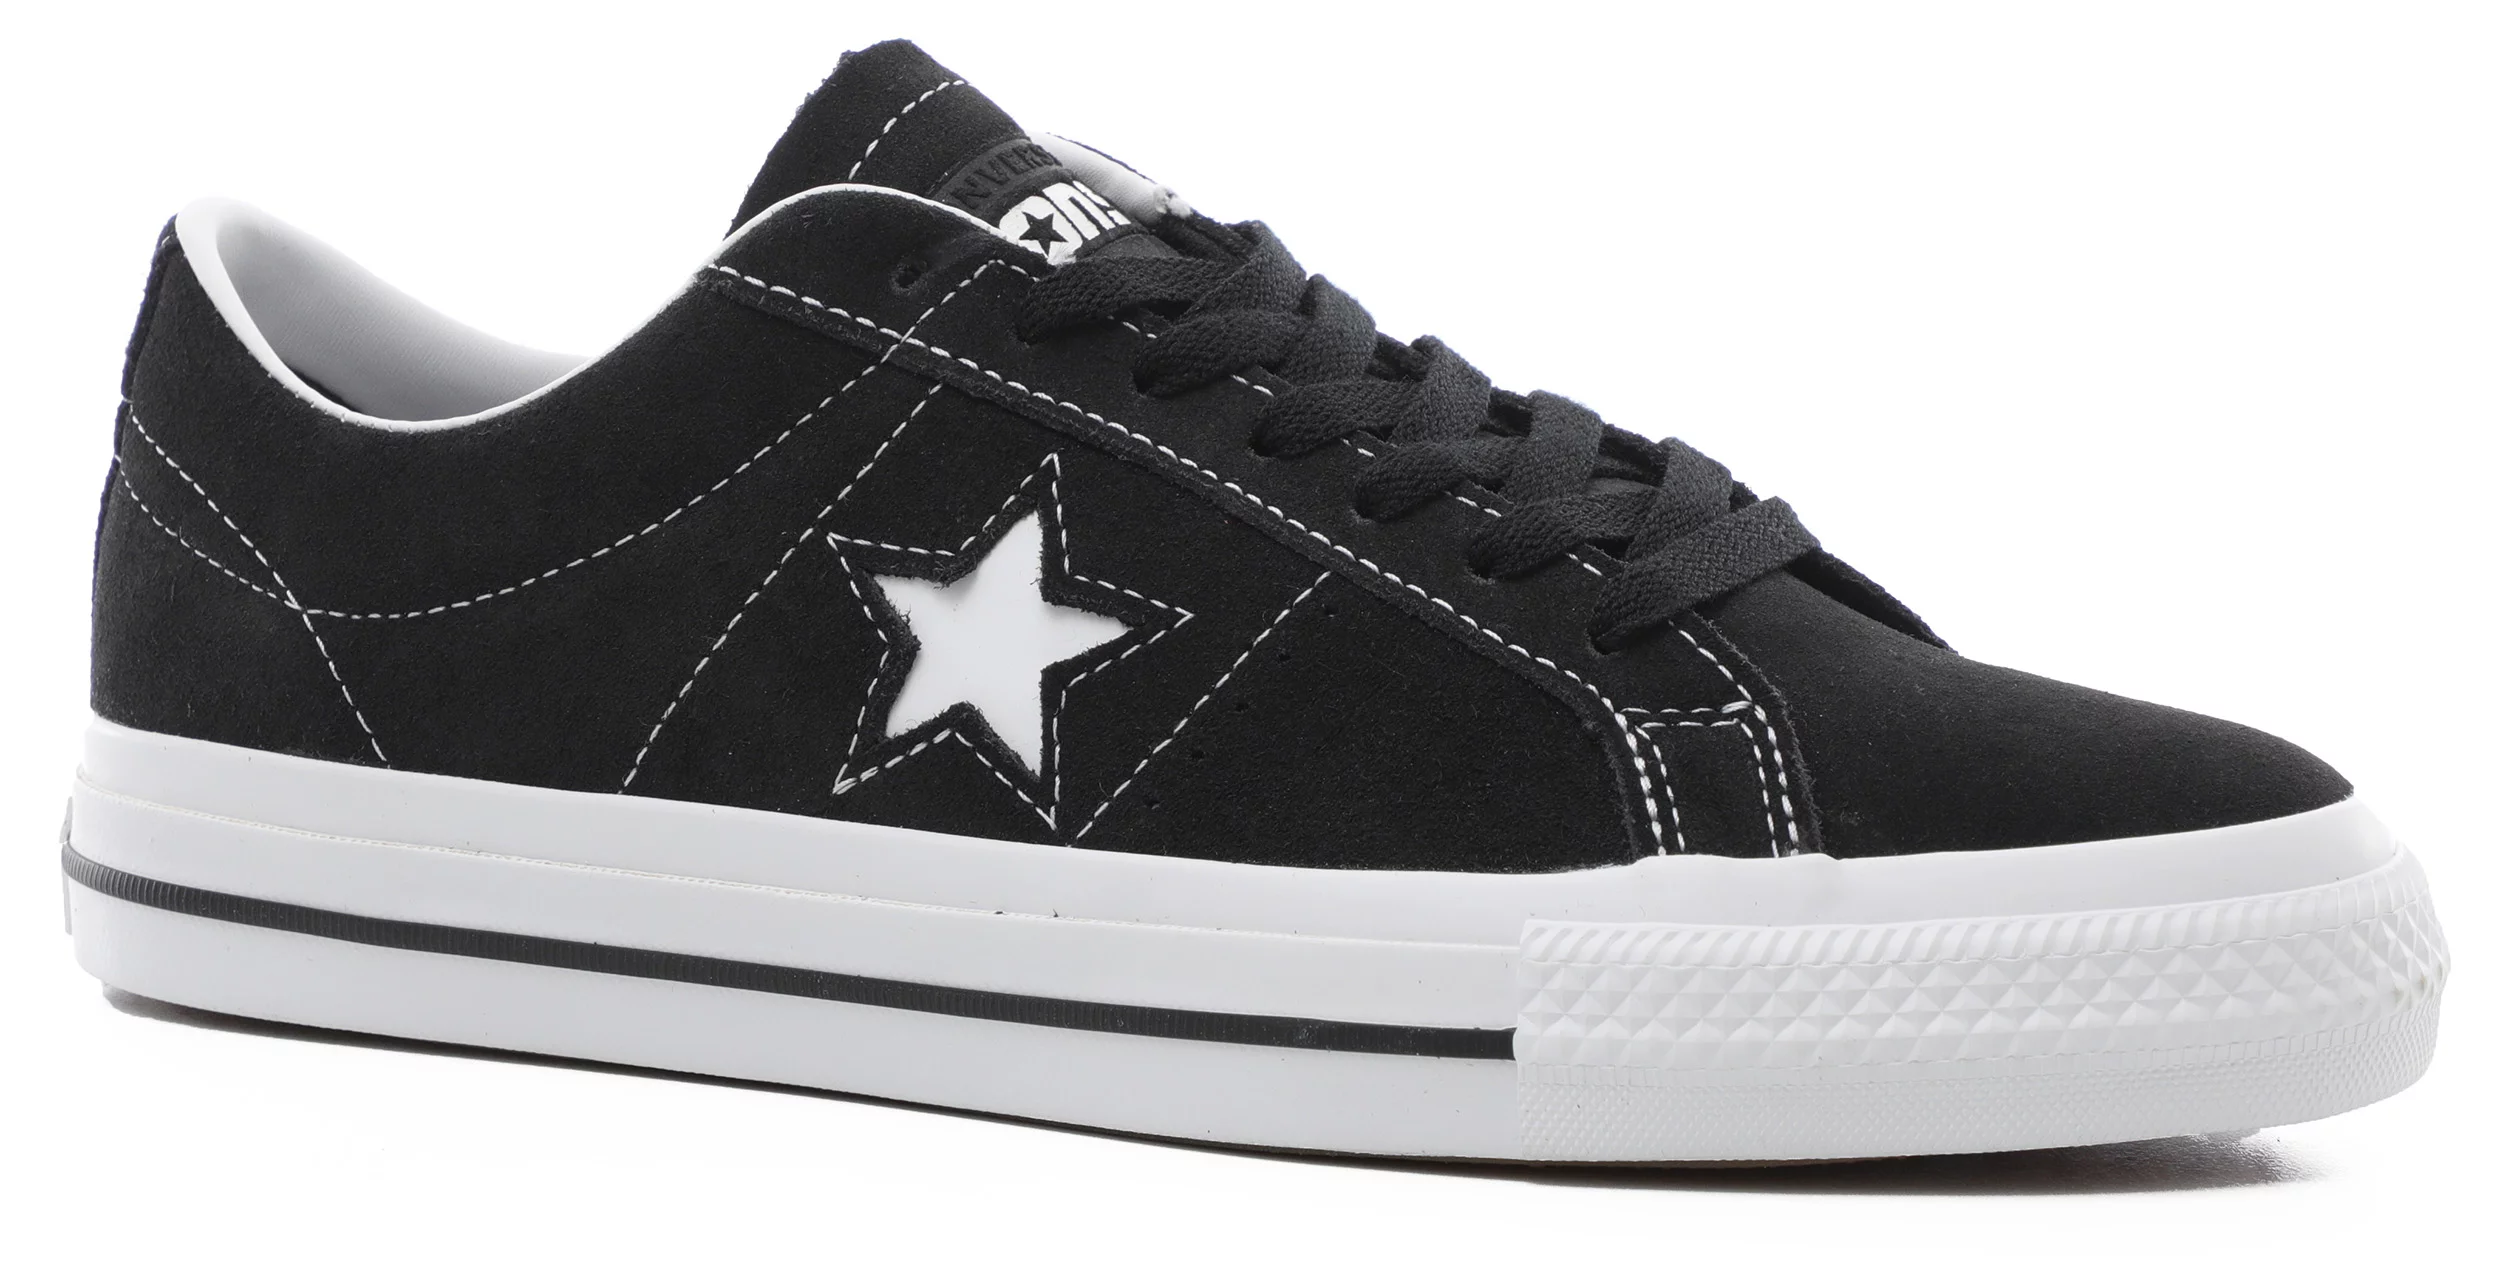 Converse One Star Pro Skate Shoes | Tactics